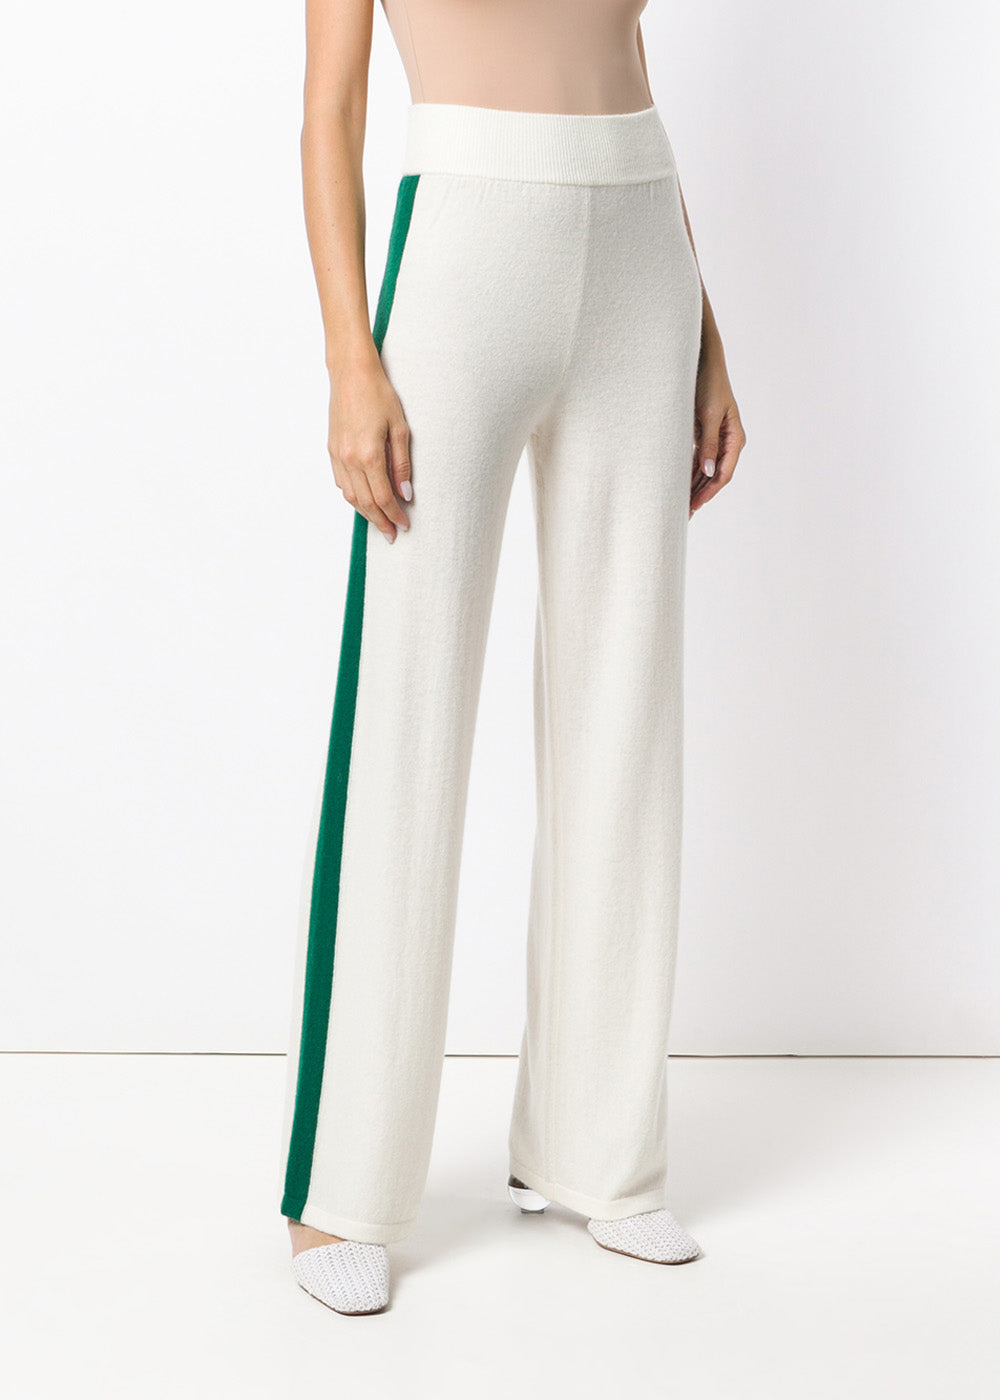 Alex Knit Trousers - Large / Ivory/Forest Green